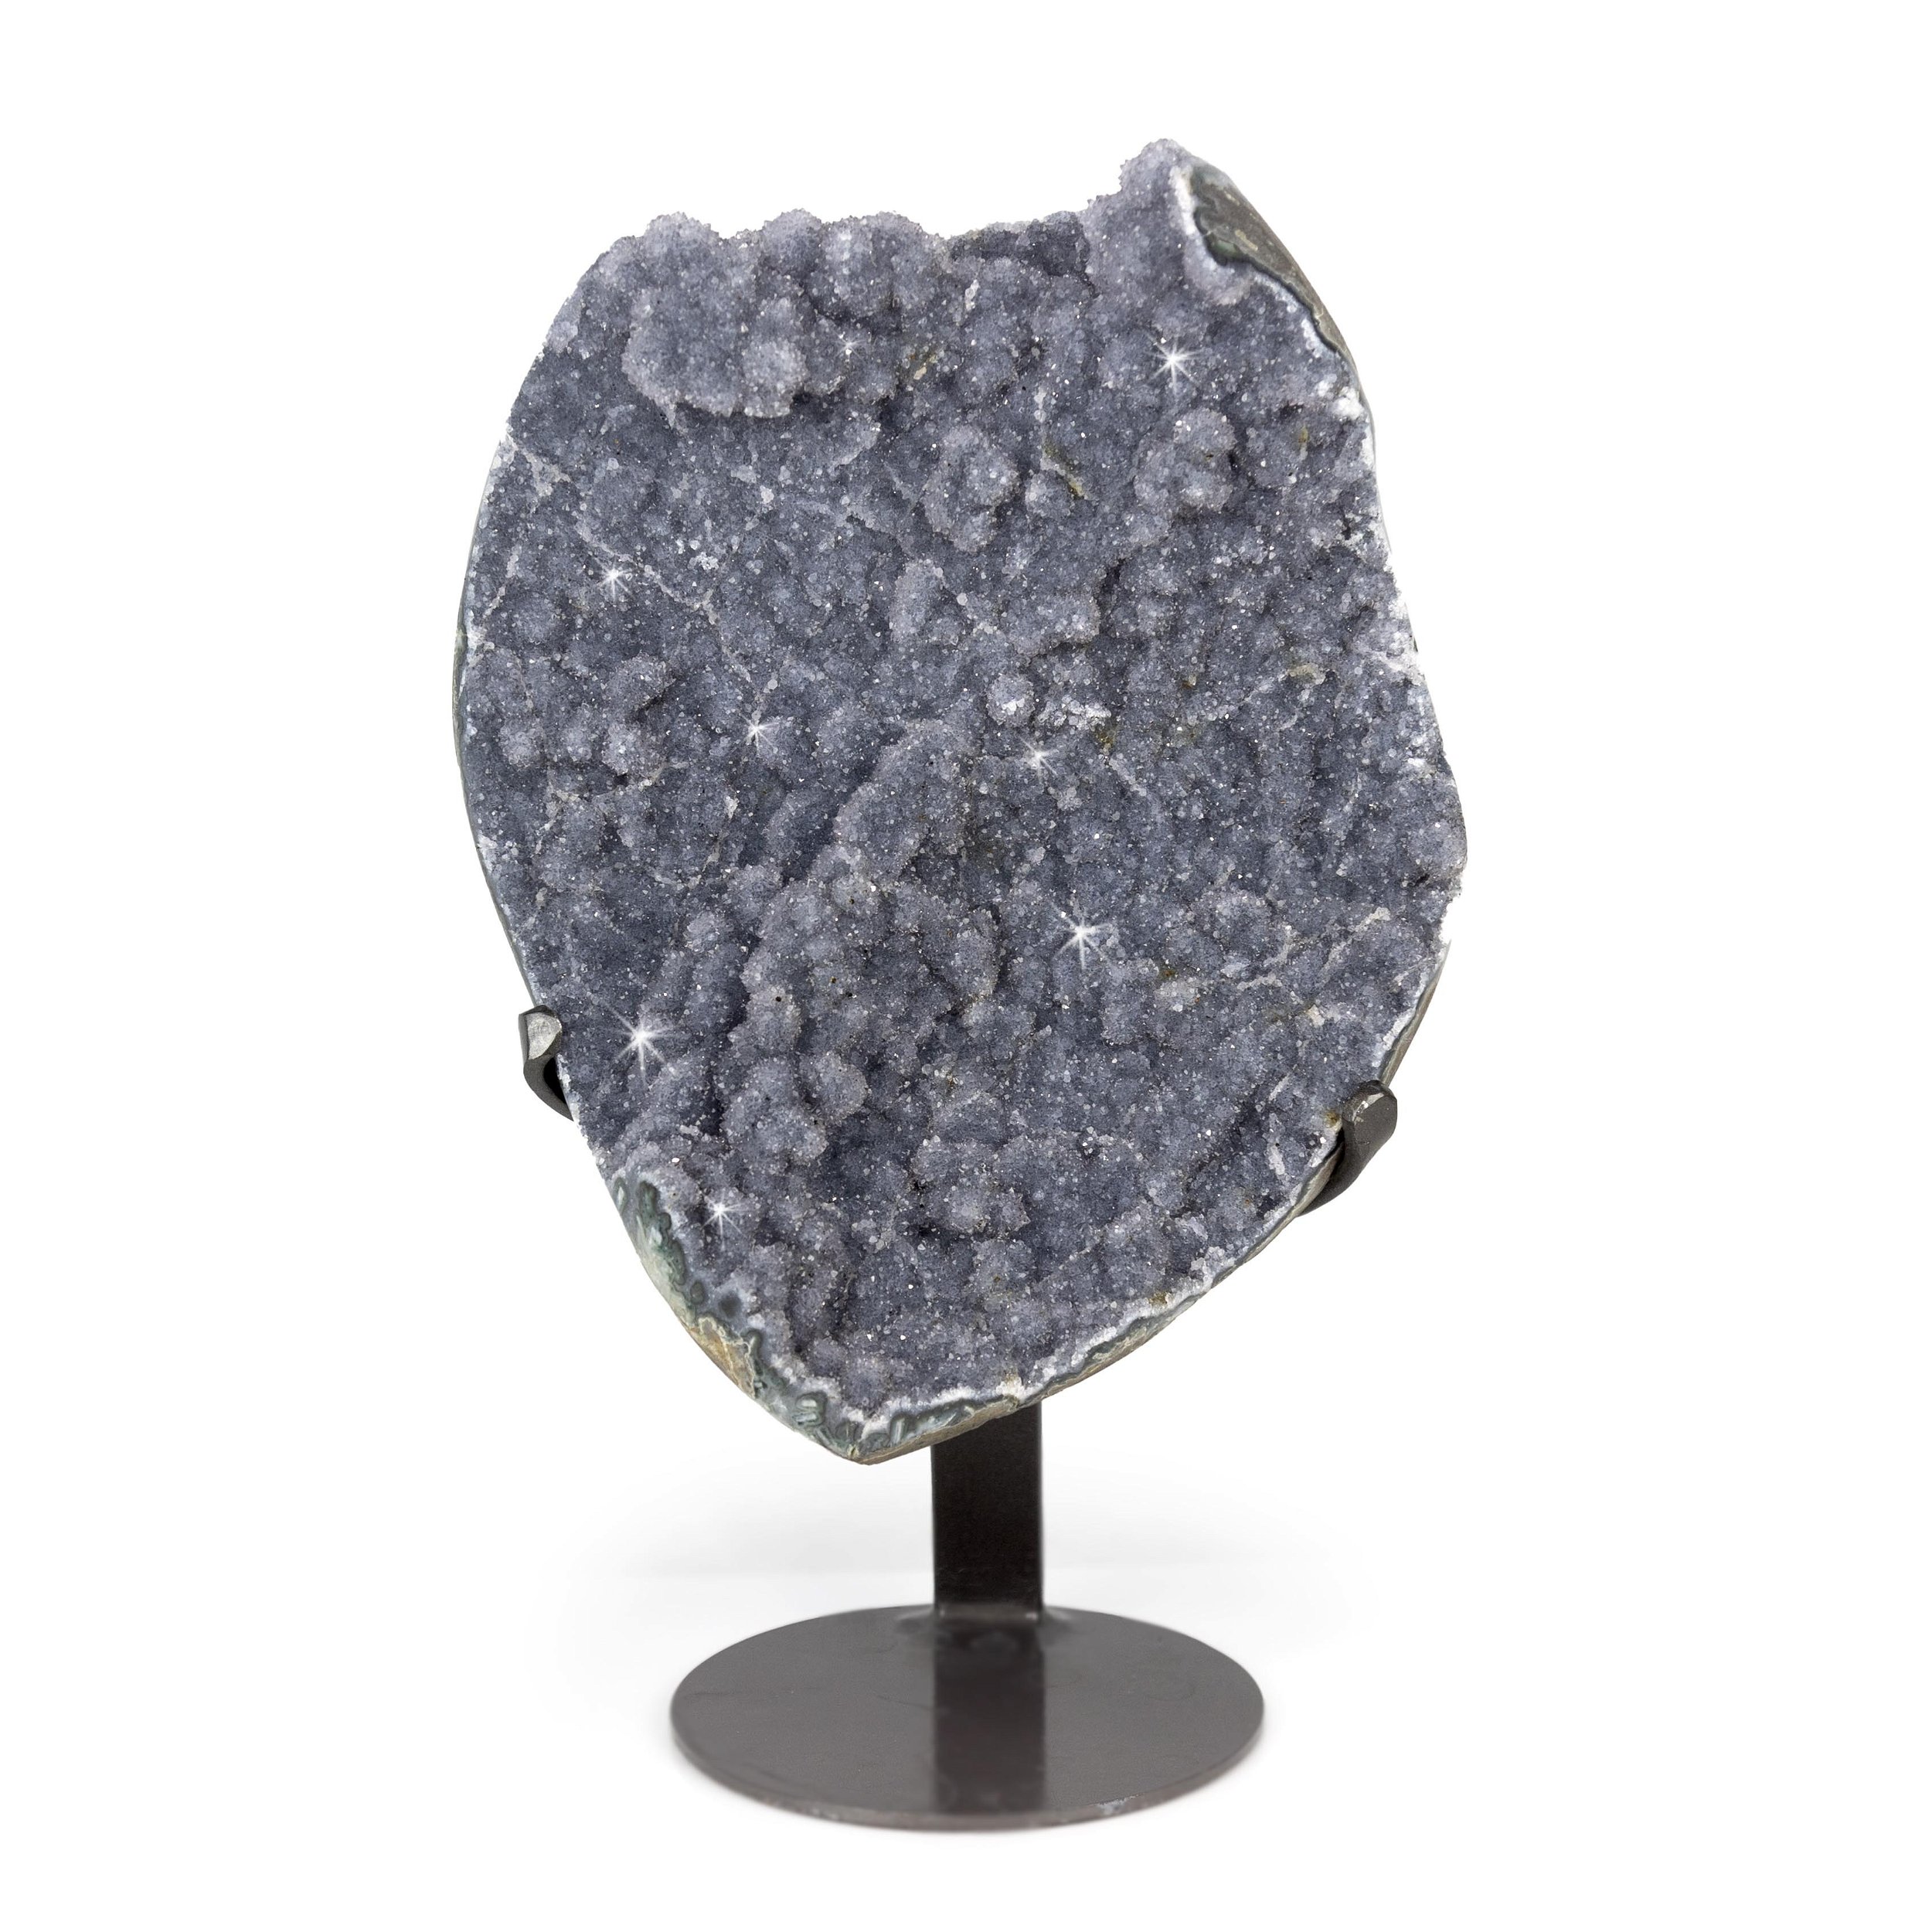 Druze Geode On A Fitted Spiral Stand - Blue Gray With "Veins" Of Calcite